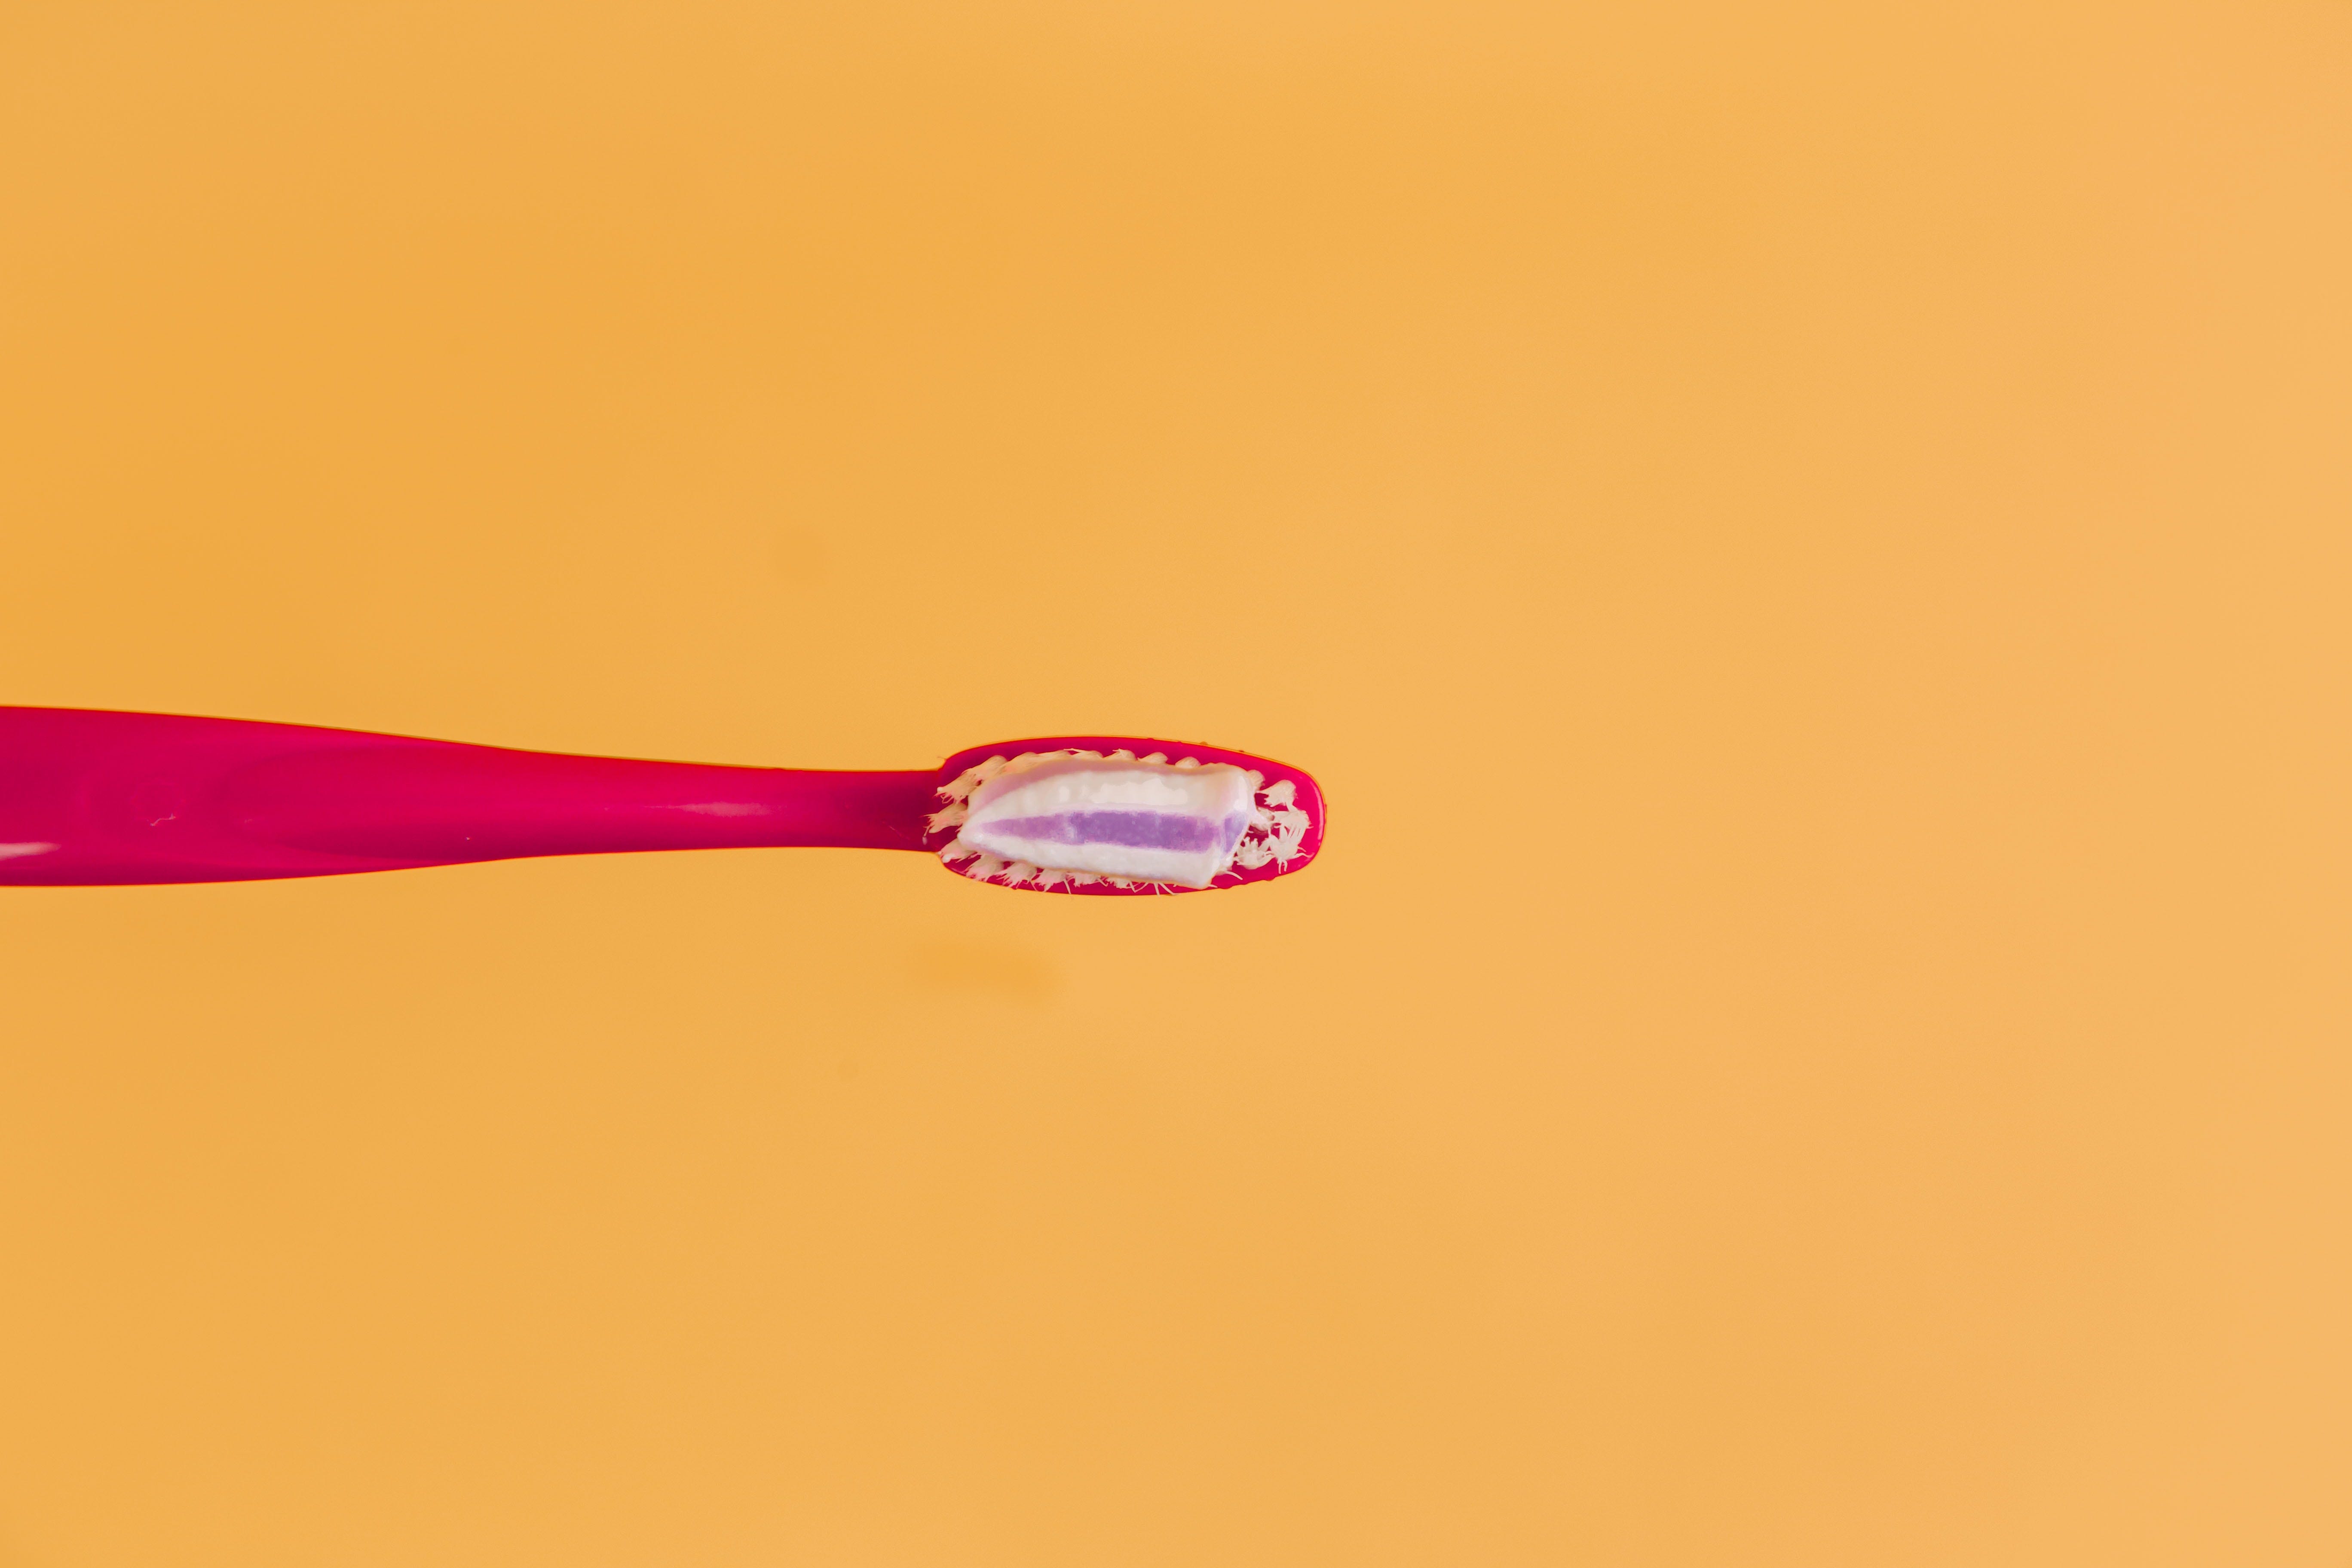 Red toothbrush on contrasting orange background